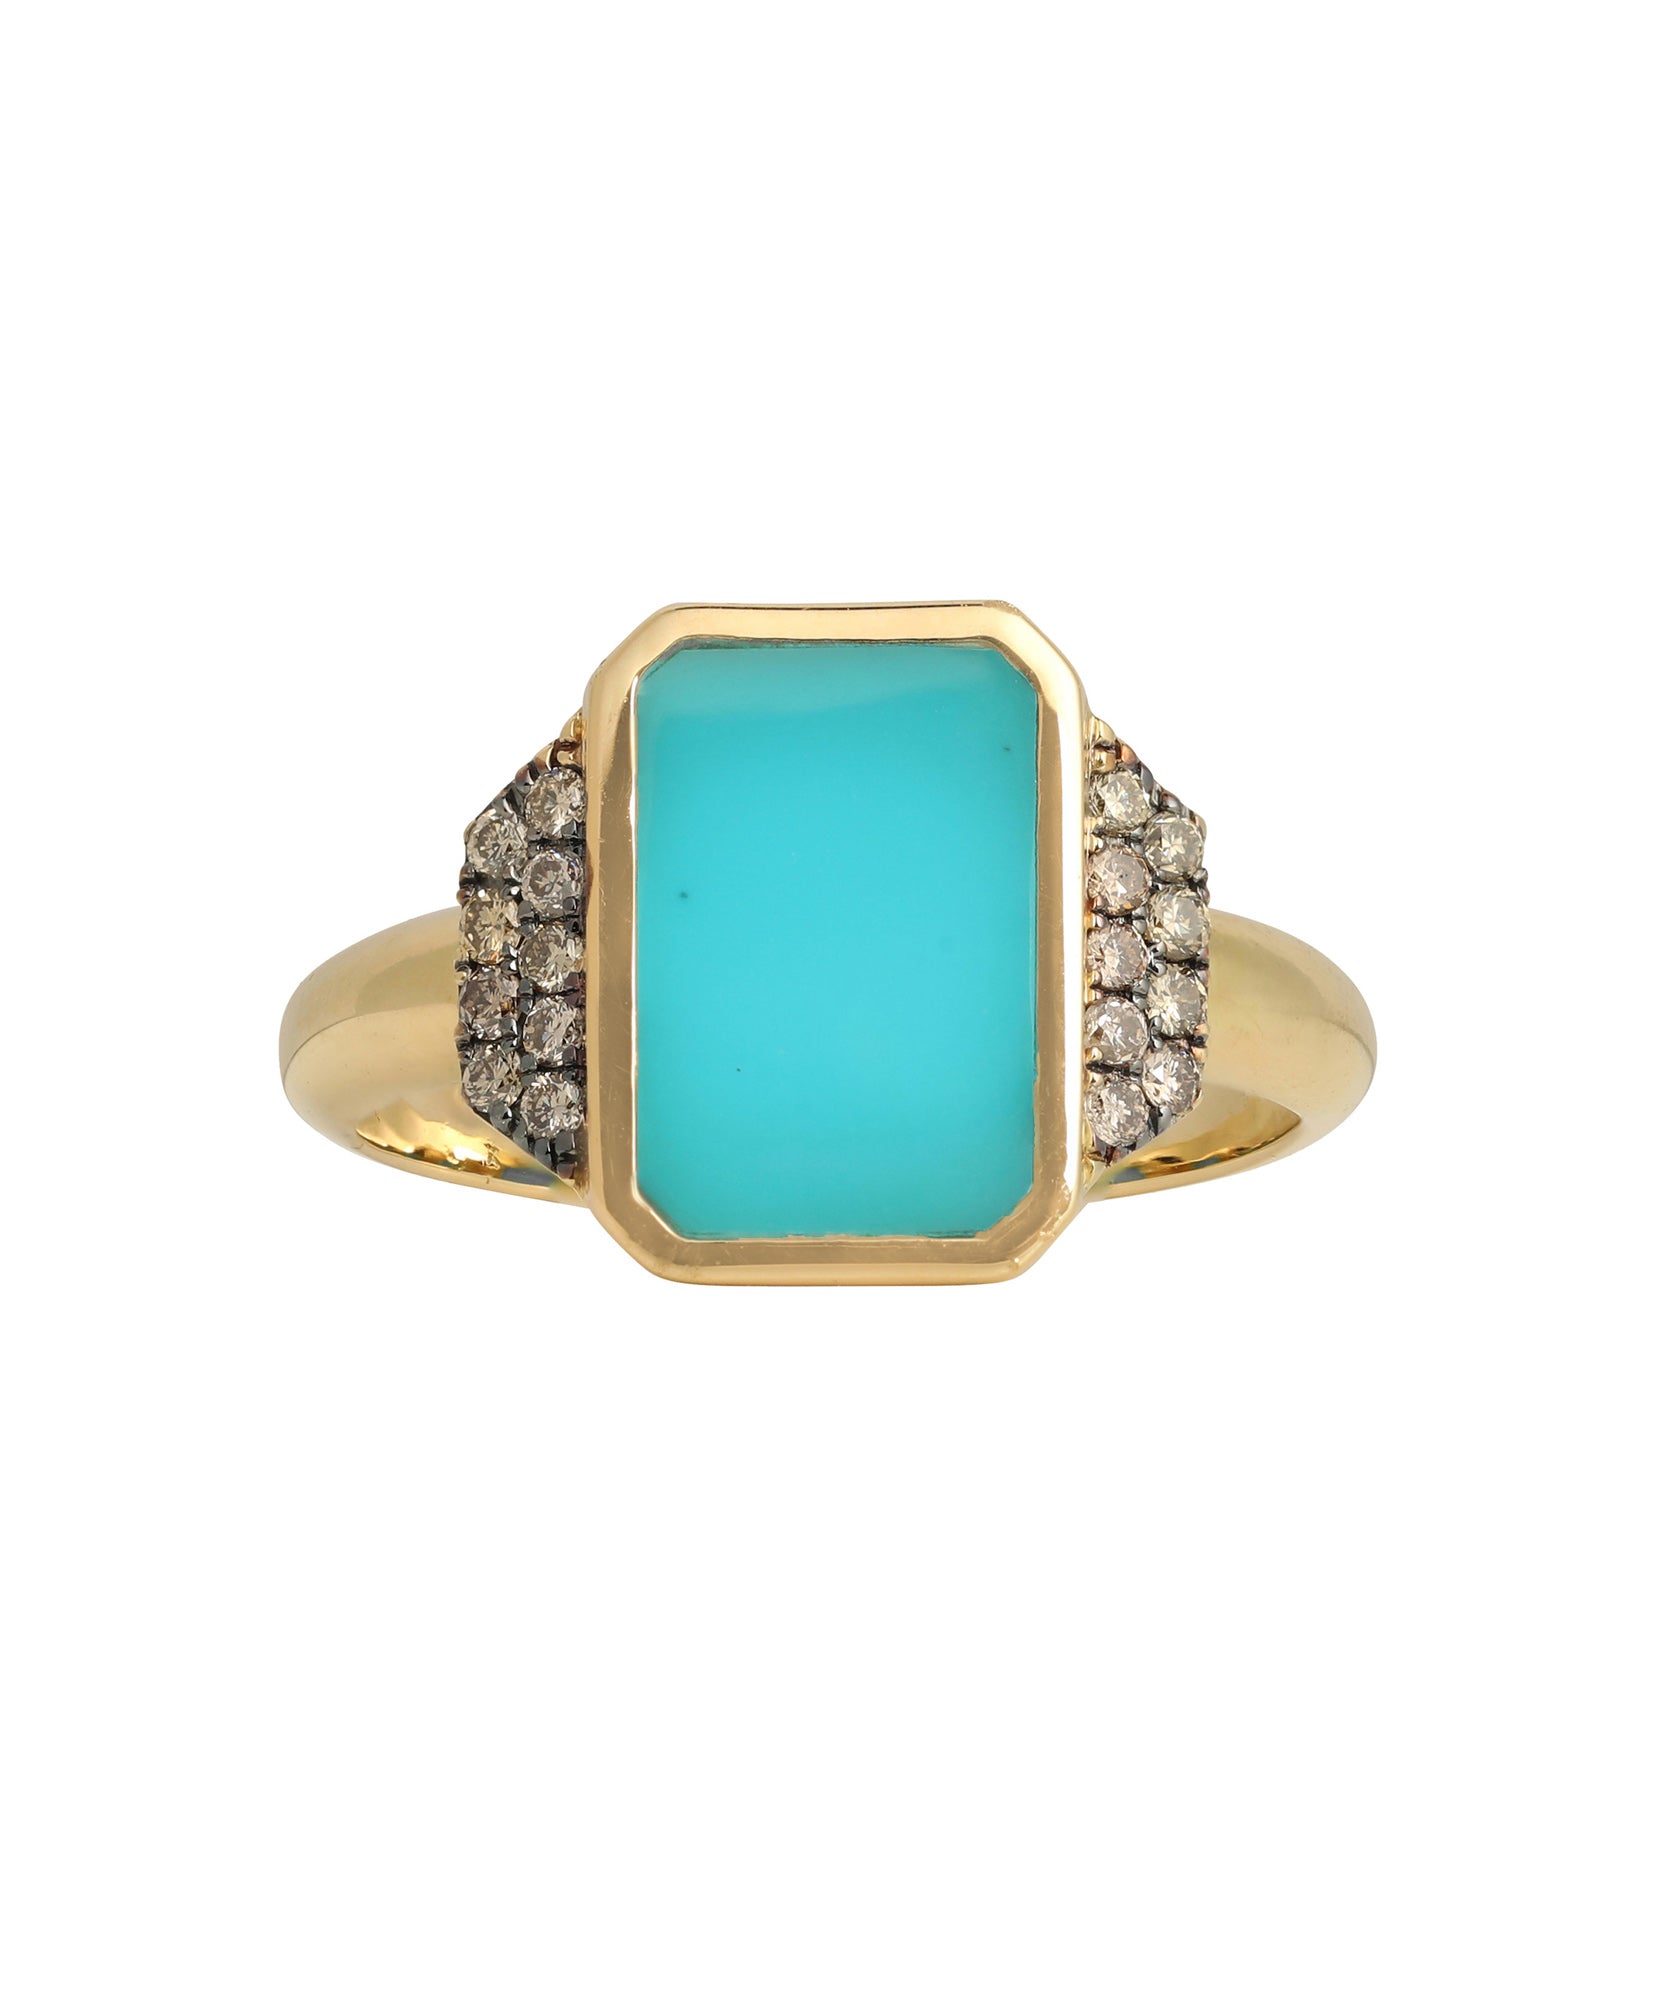 J by boghossian, gold, ring, turquoise, brown diamond